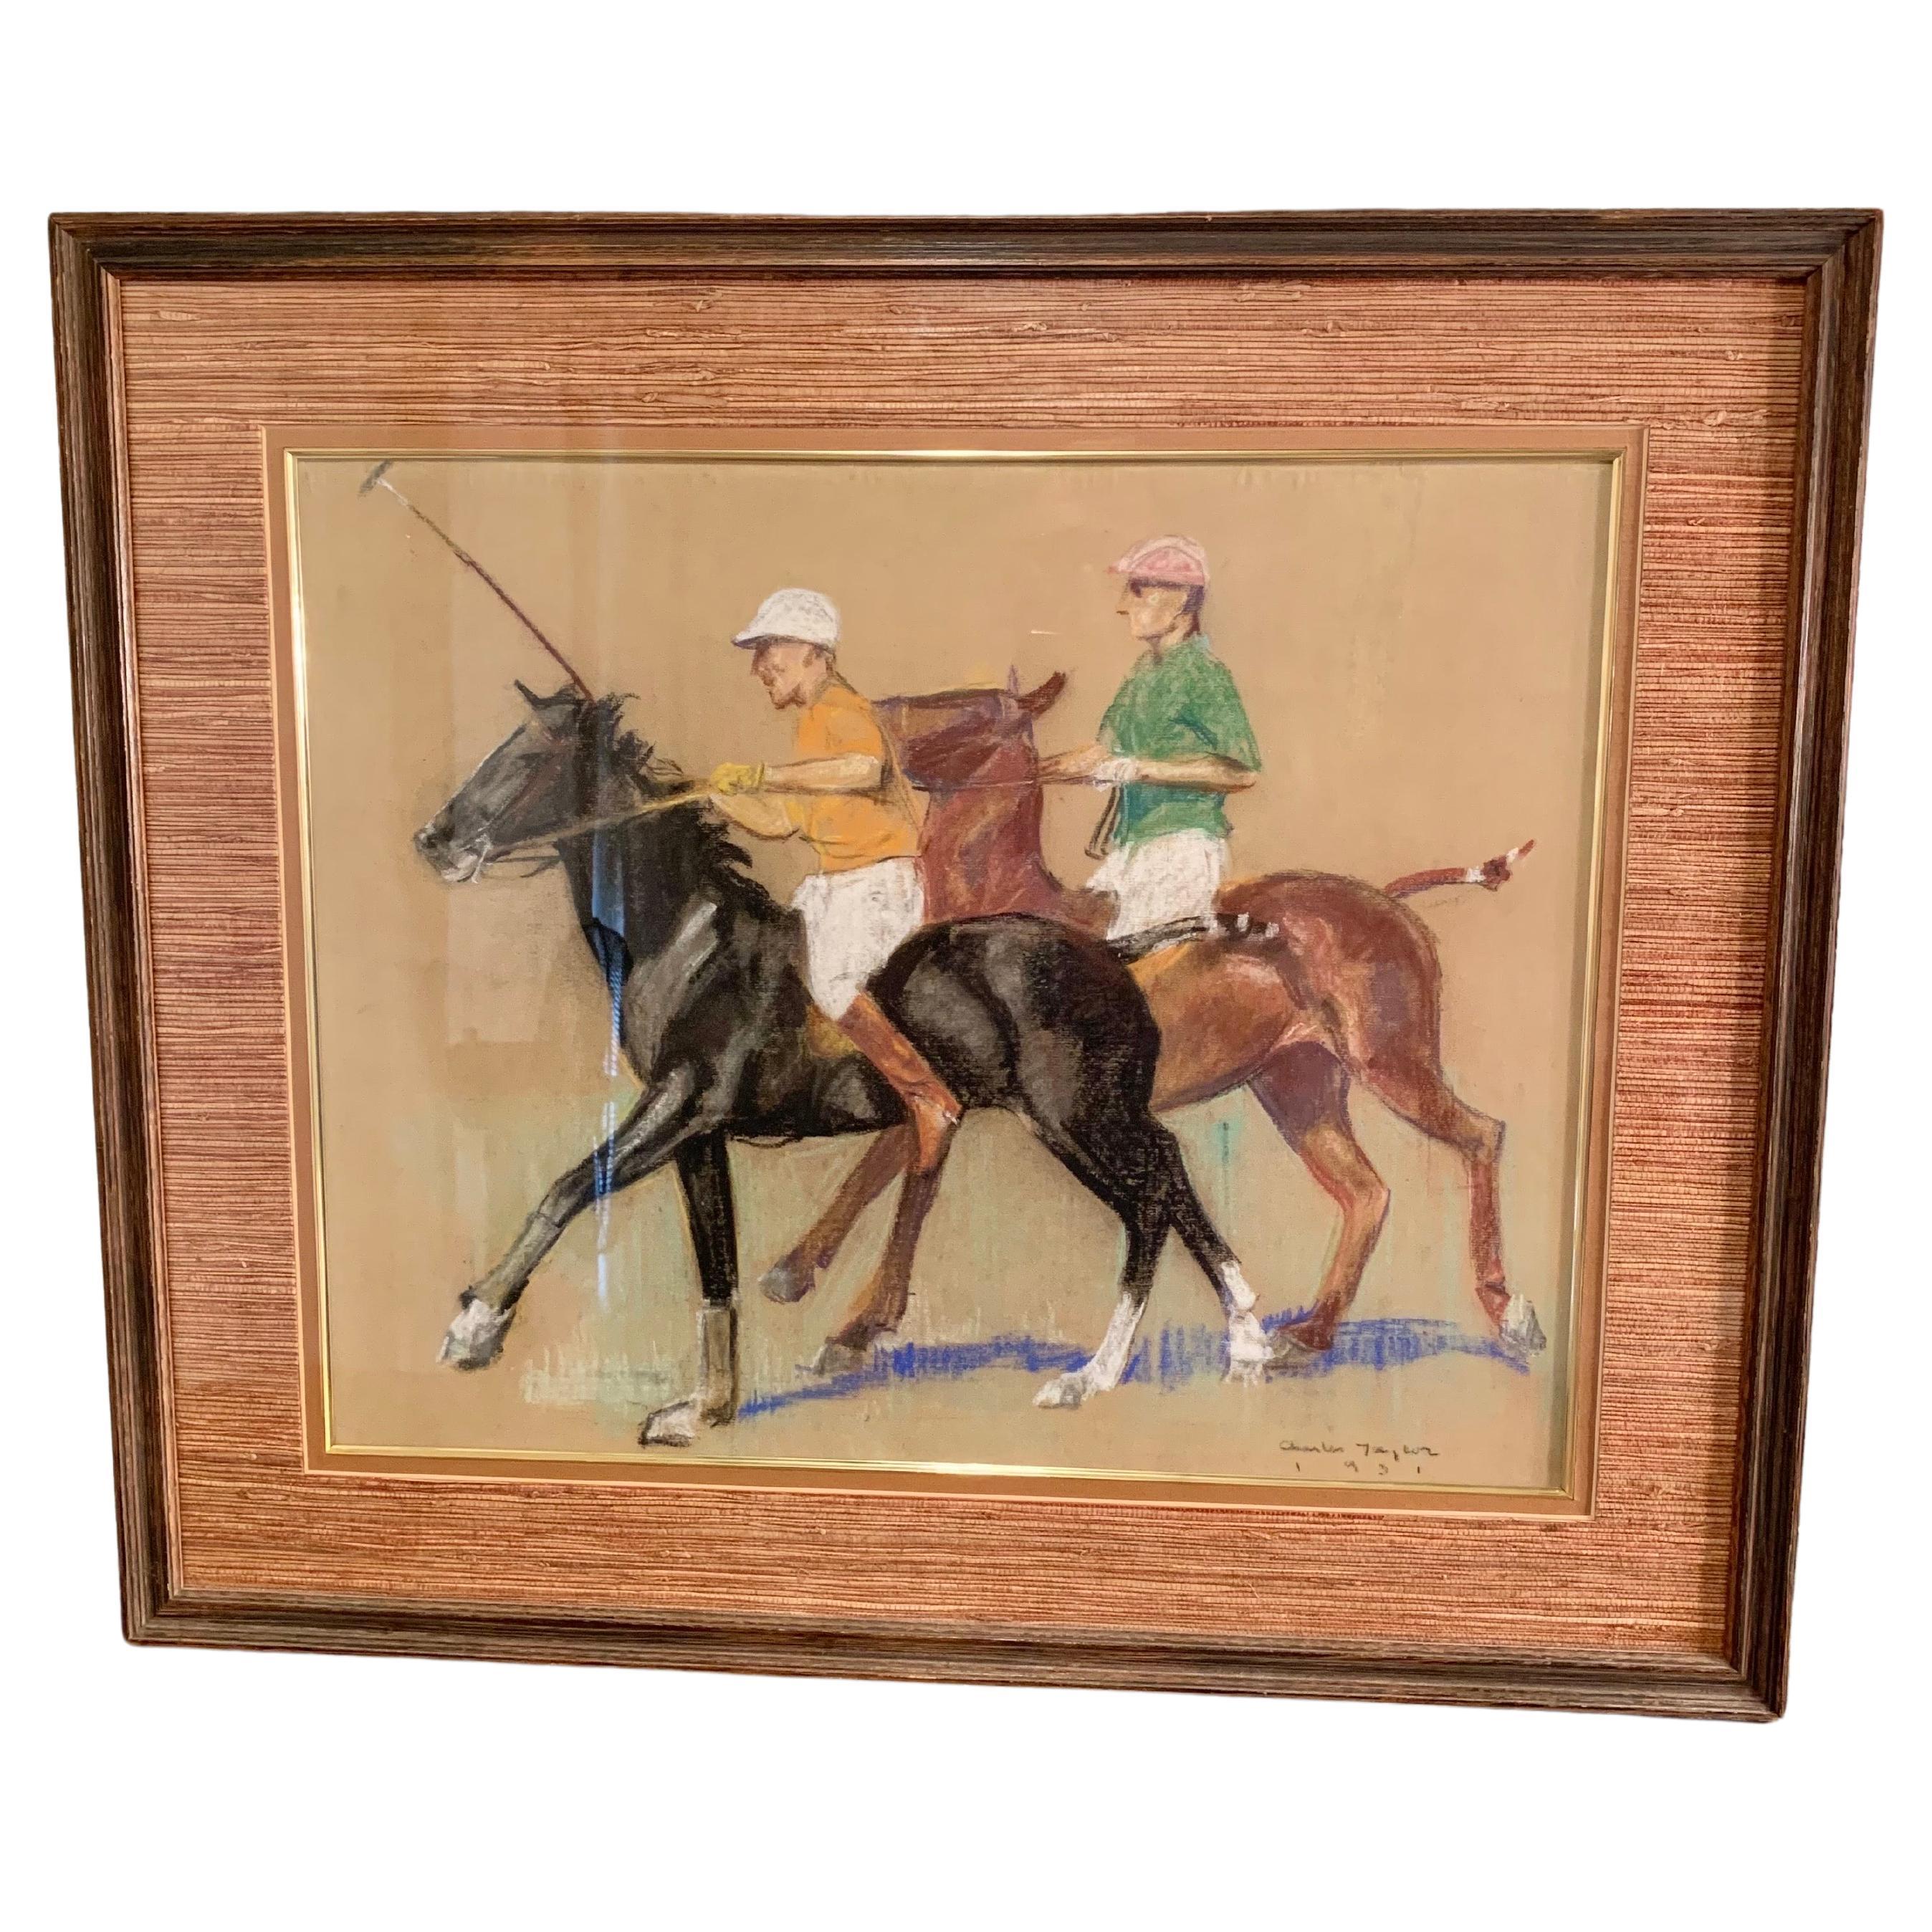 An original equestrian themed pastel and crayon drawing, this Early 20th Century Polo Players Art depicts two polo players on galloping thoroughbred horses. The piece in greens, blues, whites, yellows, browns and blacks is signed and dated Charles